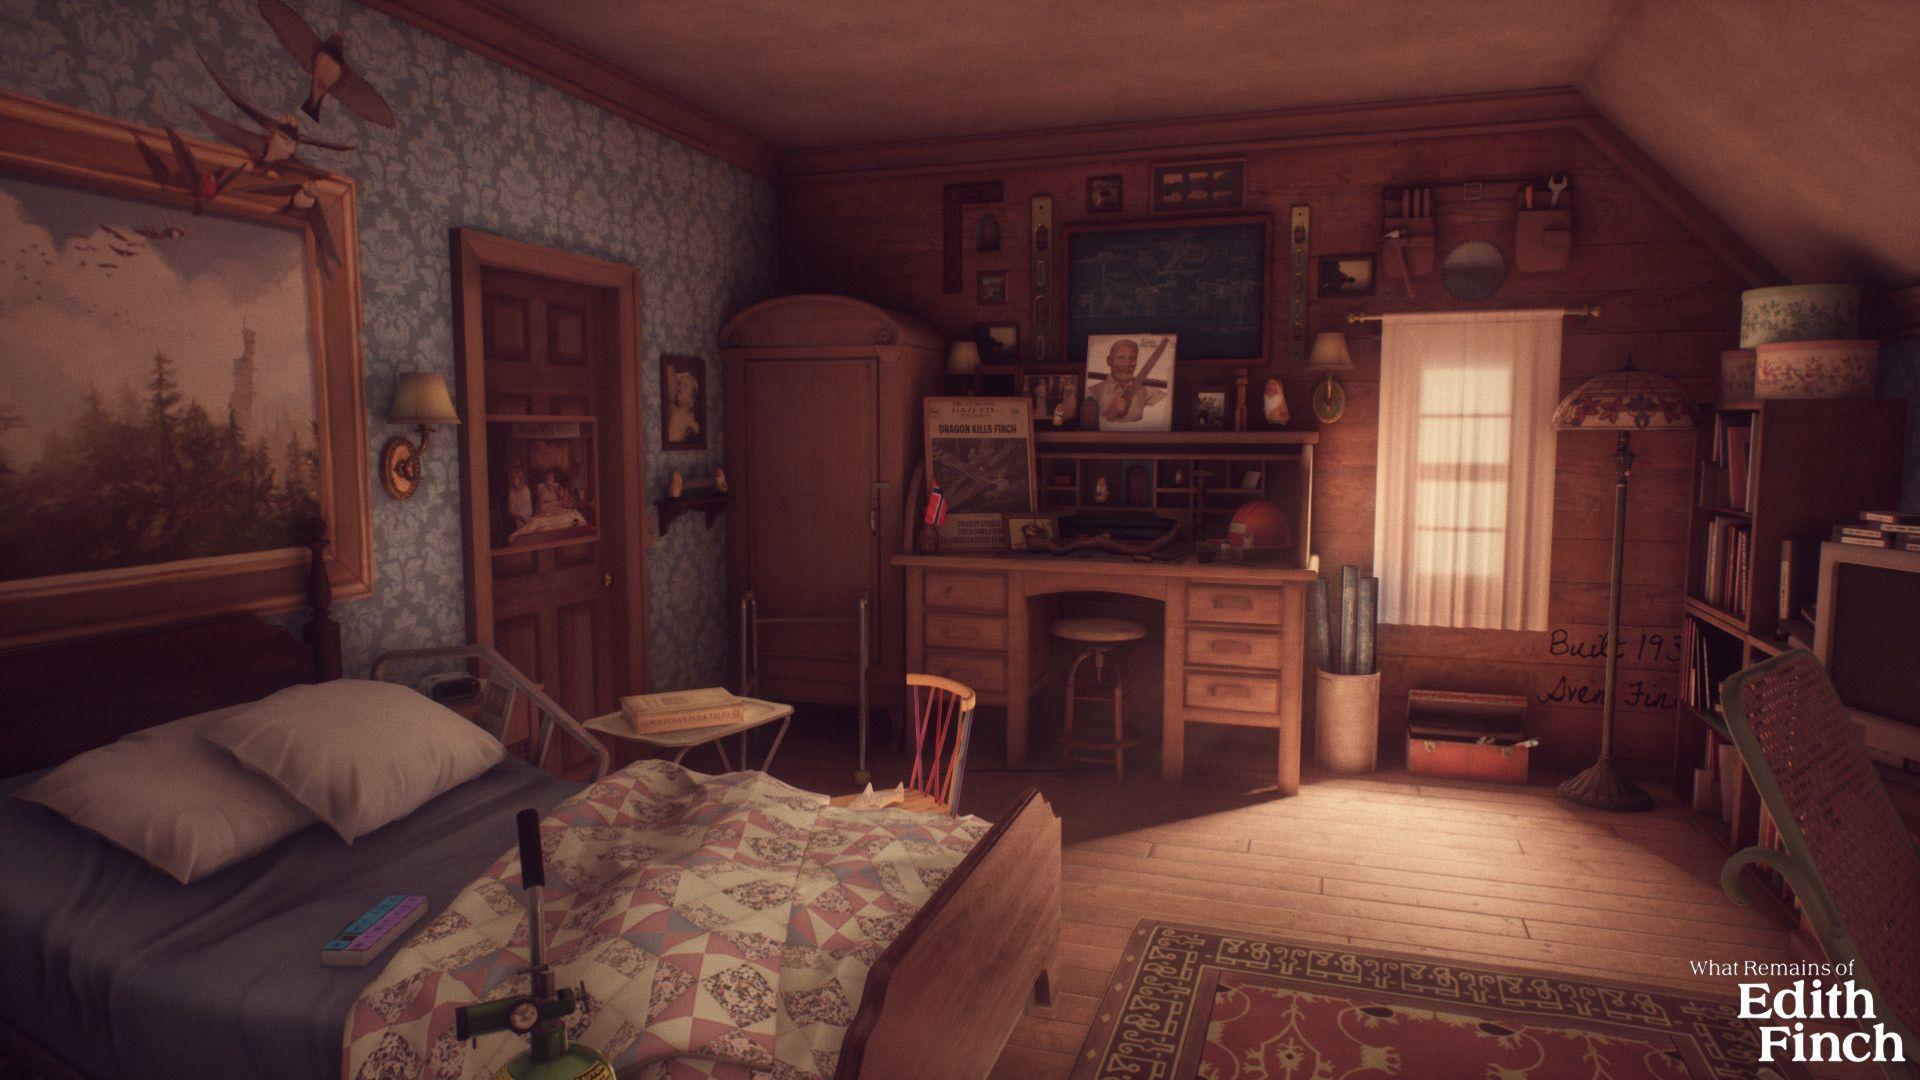 What Remains of Edith Finch and Edie's Room